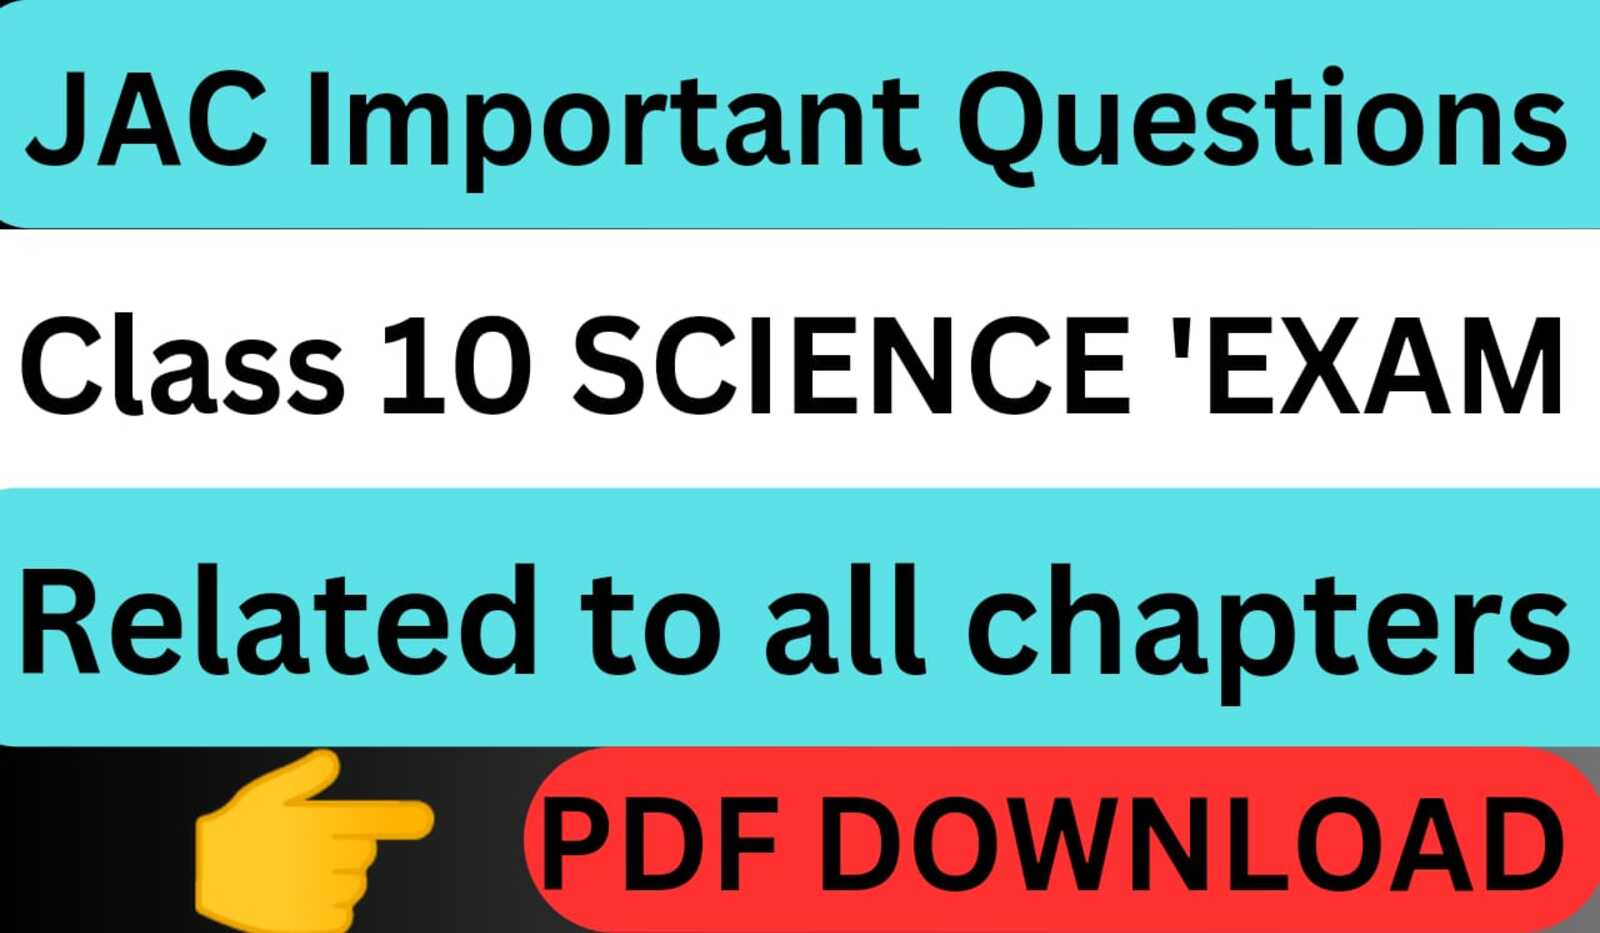 JAC Important Questions For Class 10 Science Exam PDF Download